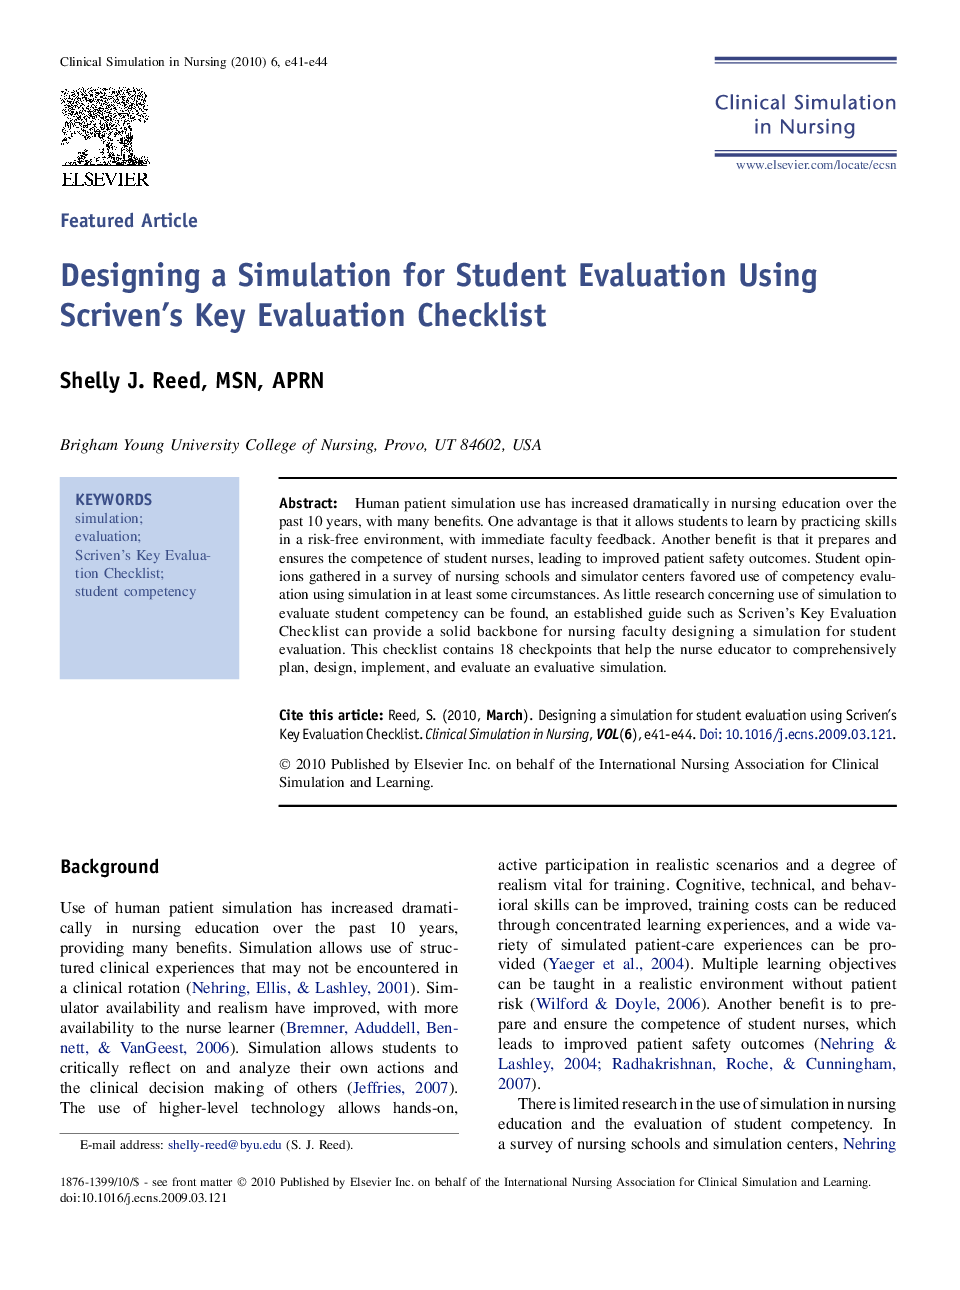 Designing a Simulation for Student Evaluation Using Scriven's Key Evaluation Checklist 